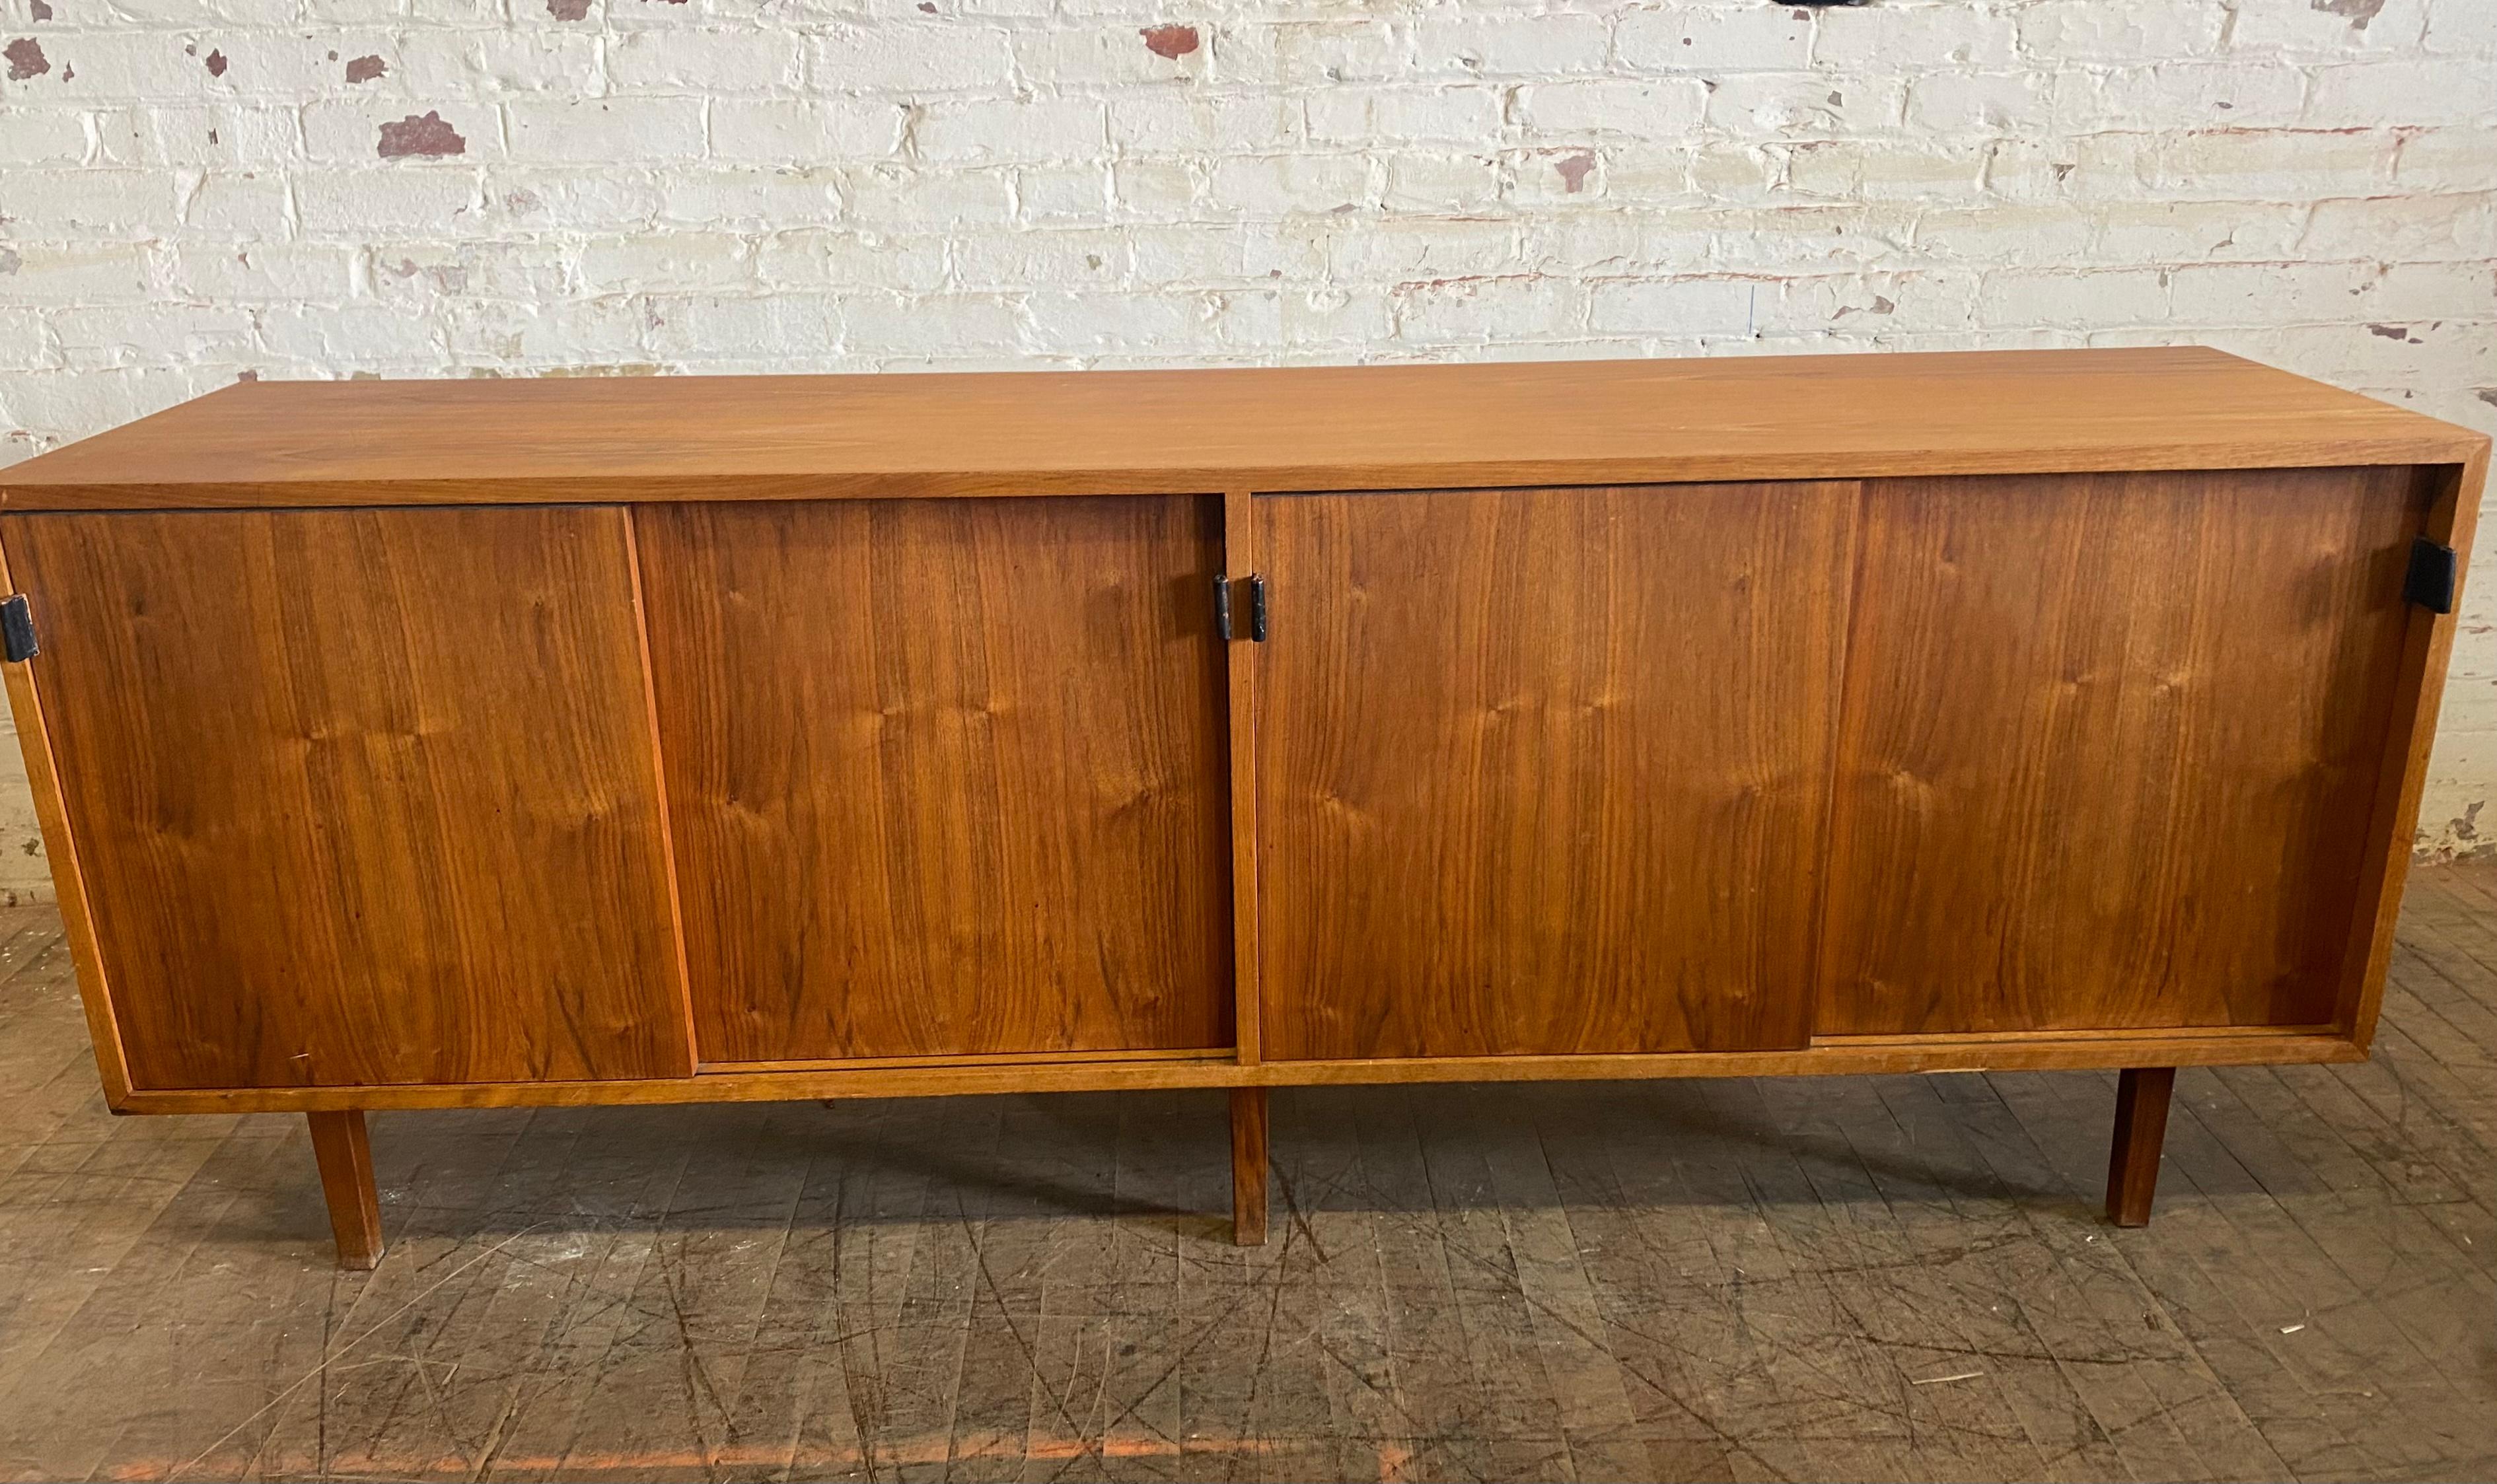 Classic modernist Florence Knoll walnut and oak Credenza with leather pulls and seldom seen wood legs.. Retains early Knoll label, Florence Knoll's simple. Elegant, understated design, 4 sliding doors , compartments with adjustable shelves, stunning